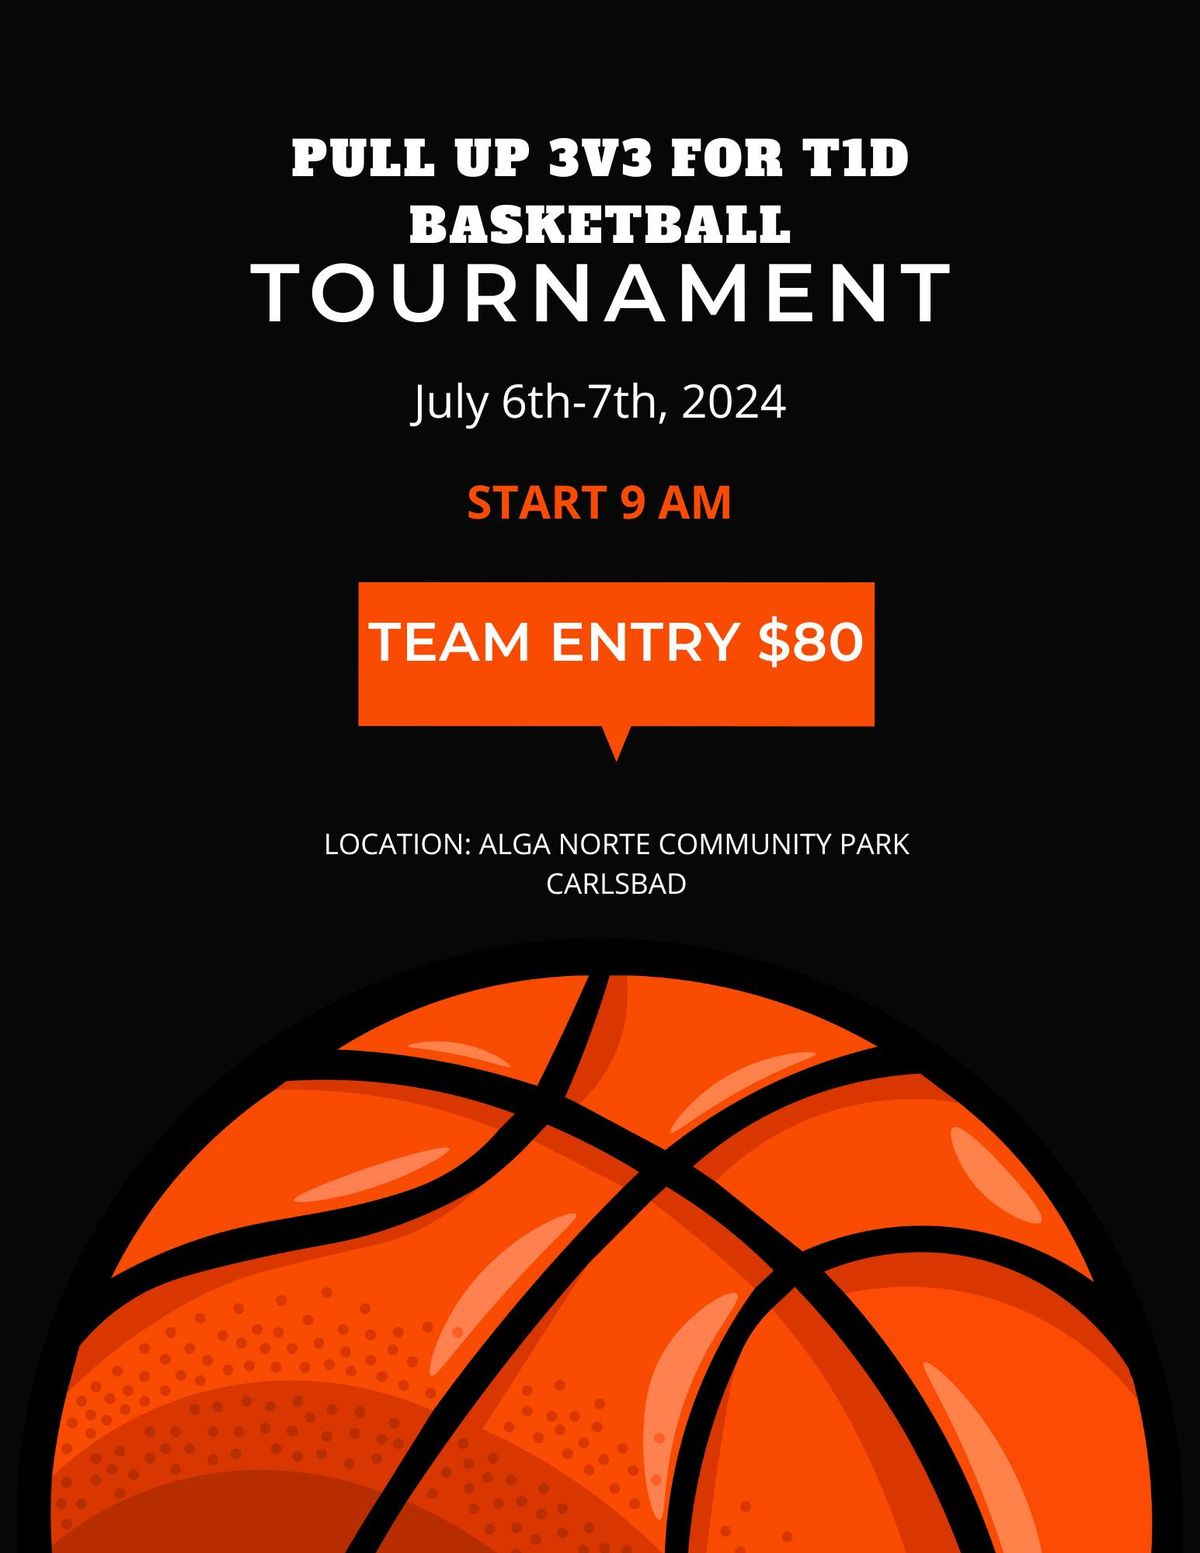 \ud83c\udfc0 Pull Up 3v3 for T1D Basketball Tournament Fundraiser \ud83c\udfc0